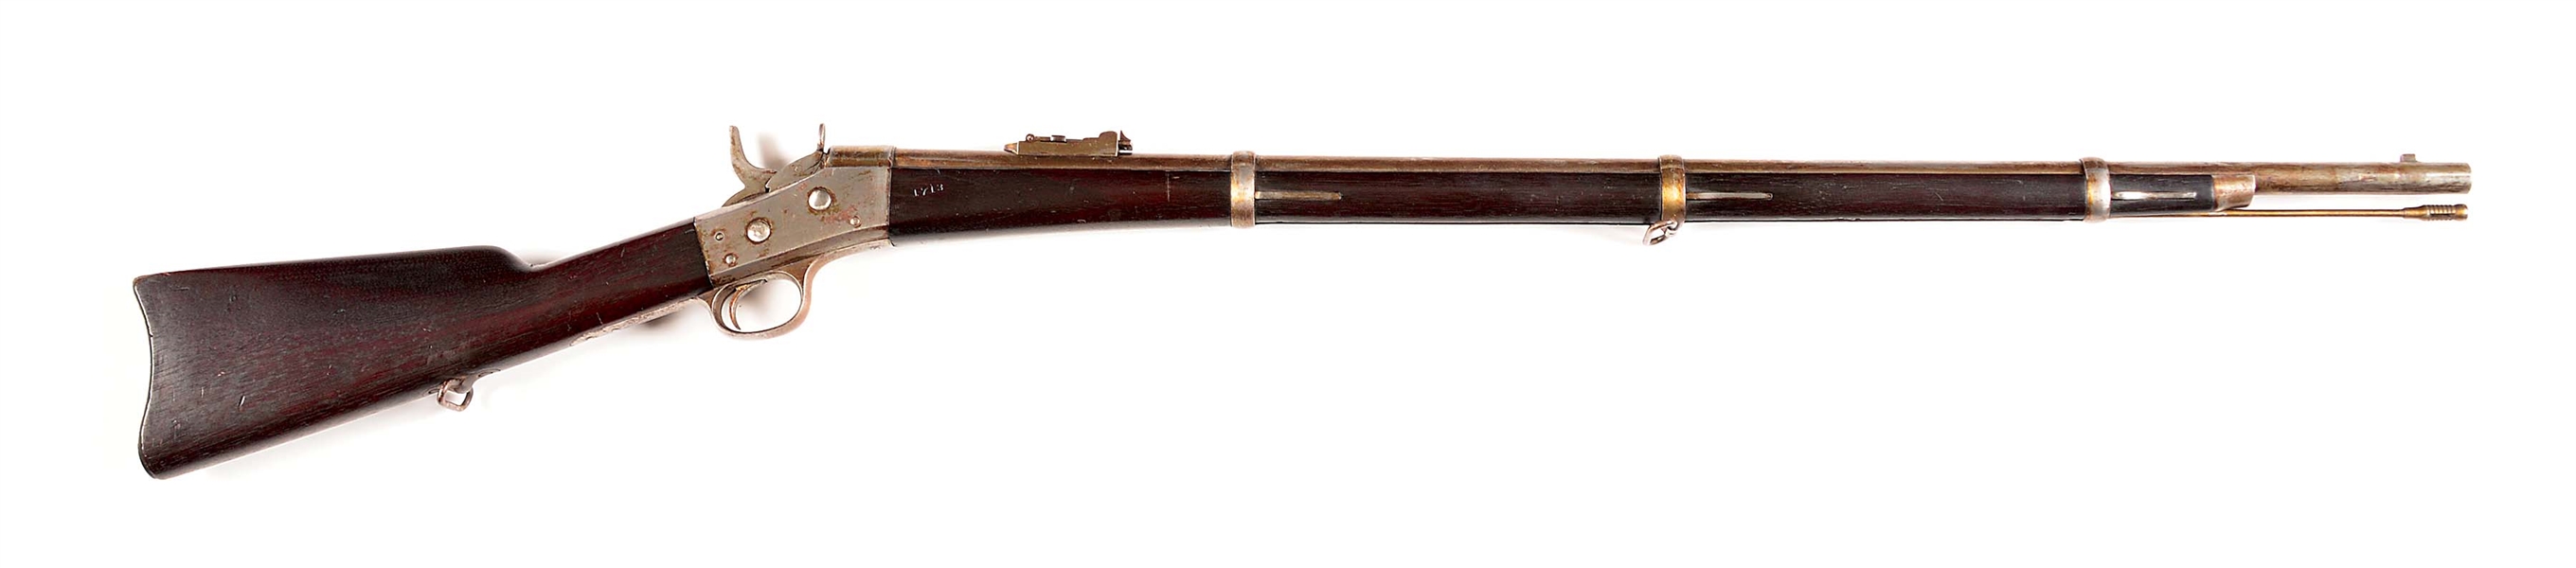 (A) REMINGTON ROLLING BLOCK RIFLE FITTED WITH EXTREMELY RARE DODGE PATENT IMPROVED BREECHBLOCK.